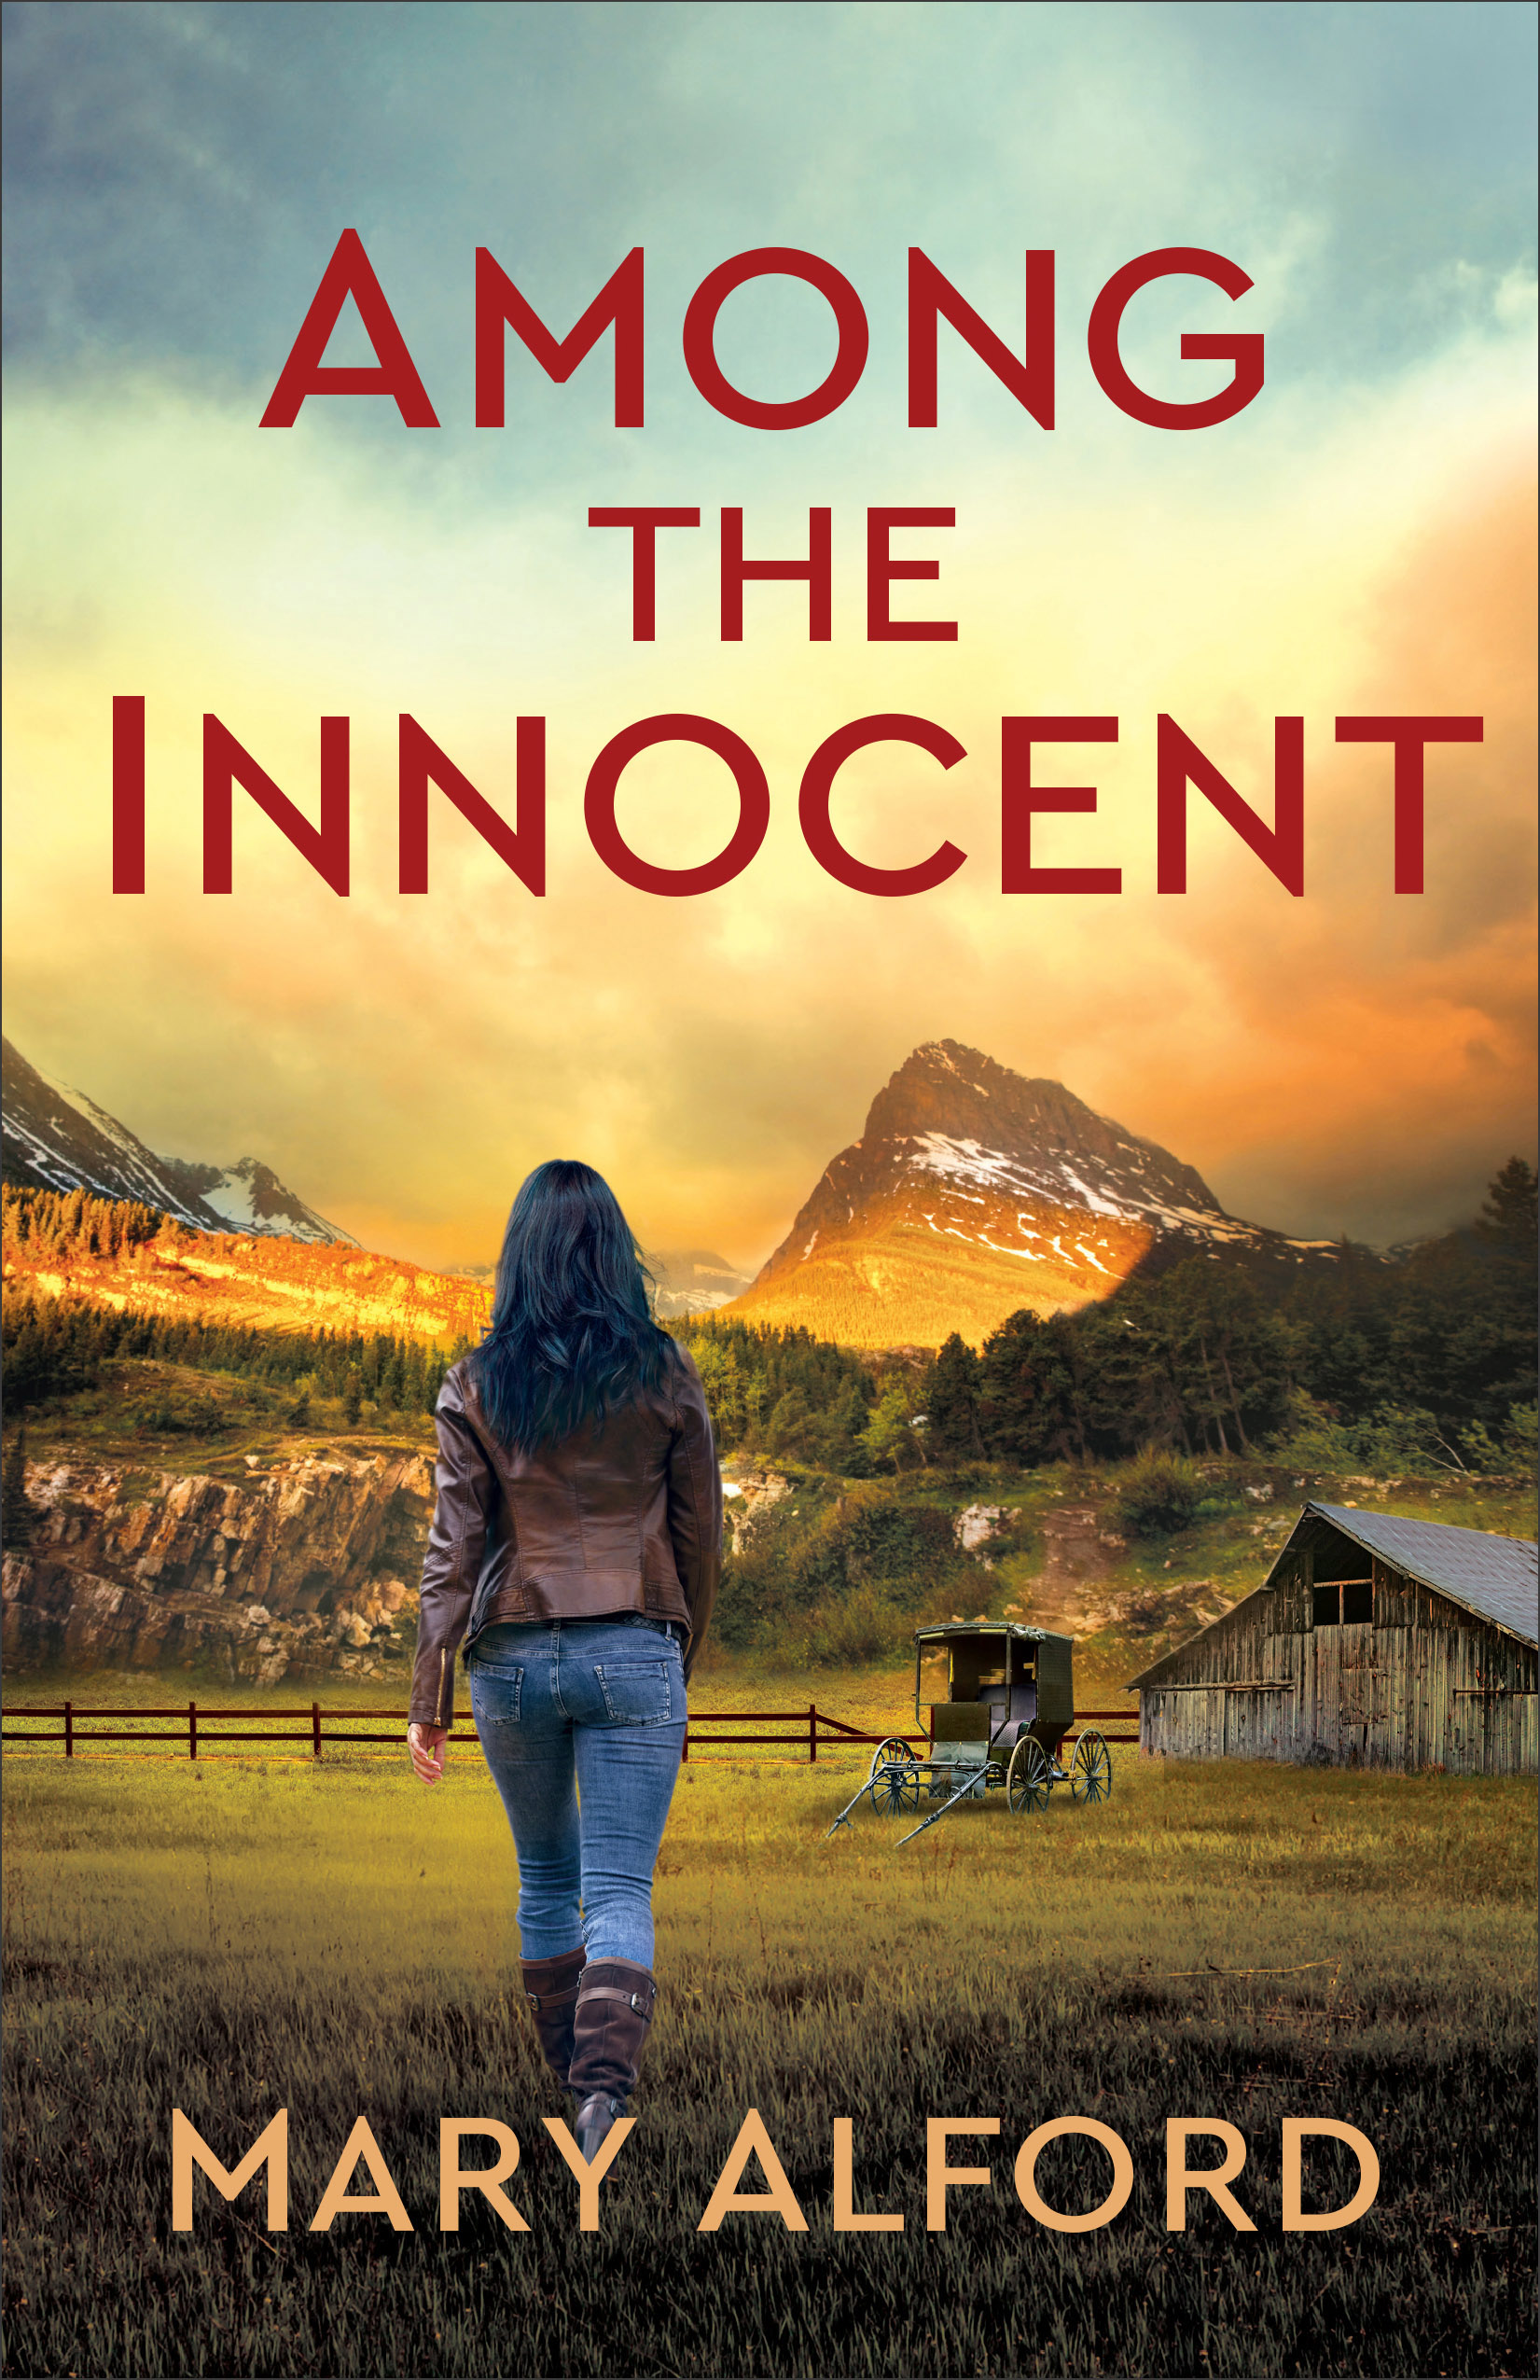 Among the Innocent by Mary Alford